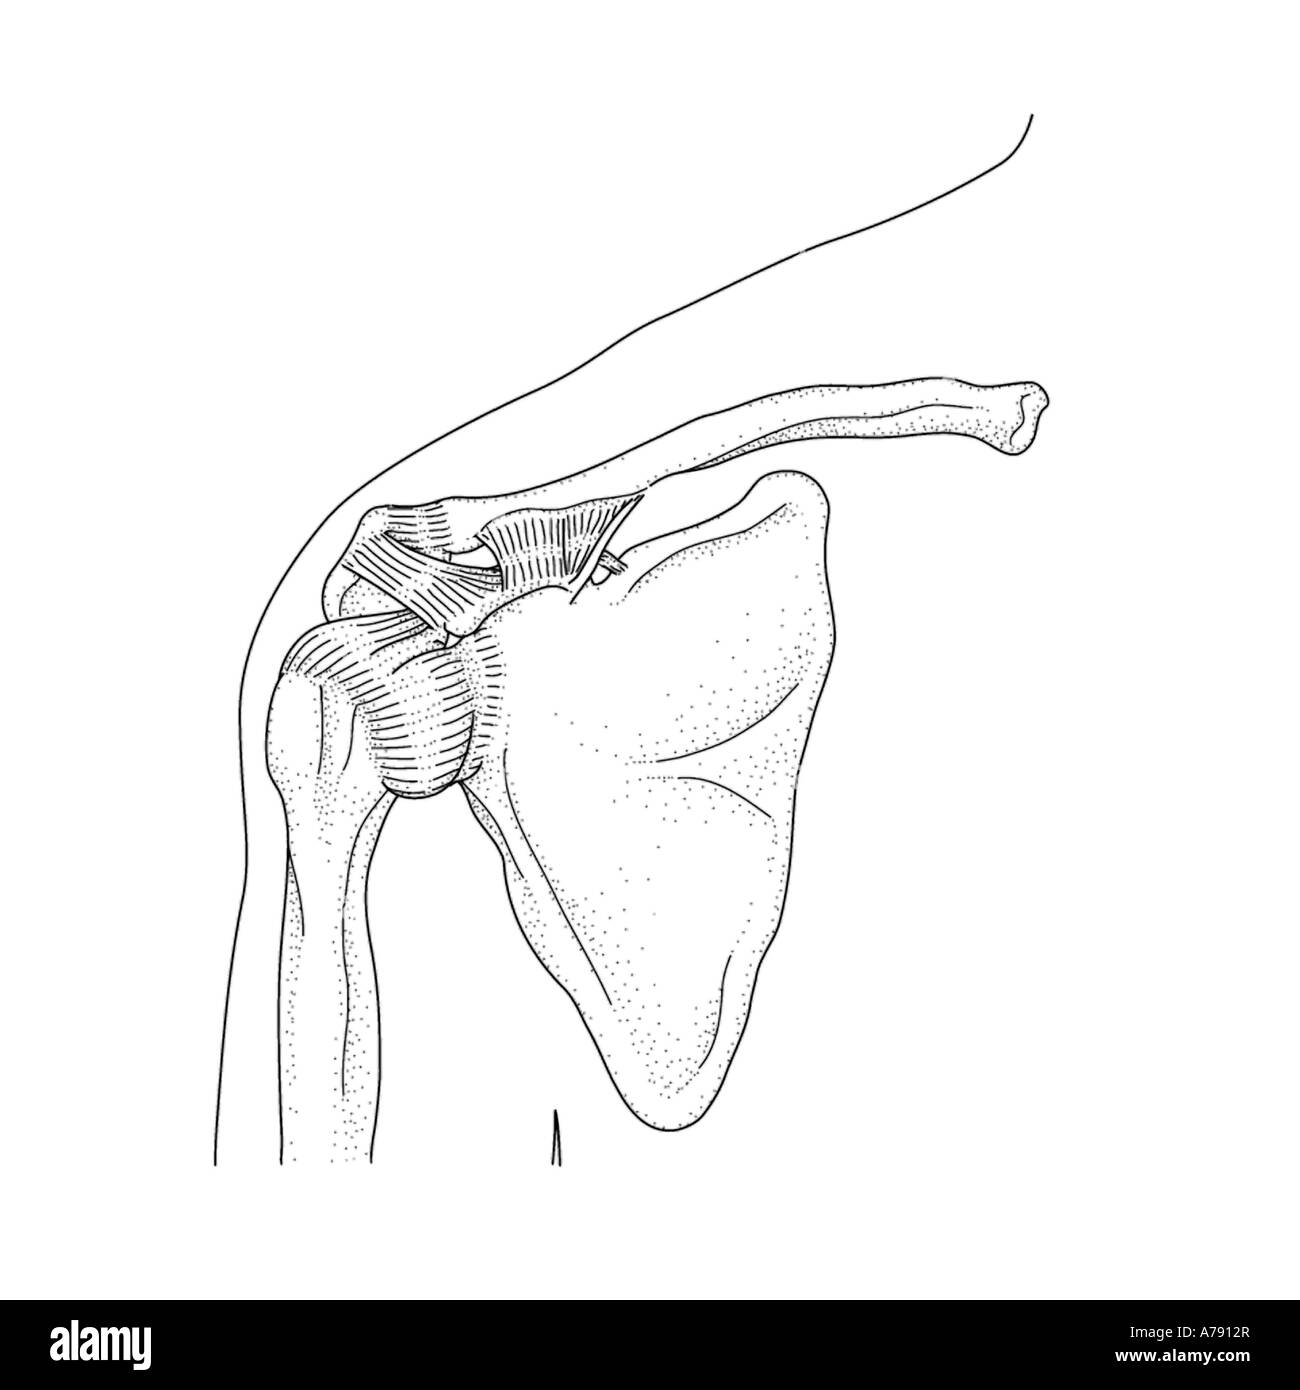 An illustration showing the musculature of the shoulder joint. Stock Photo